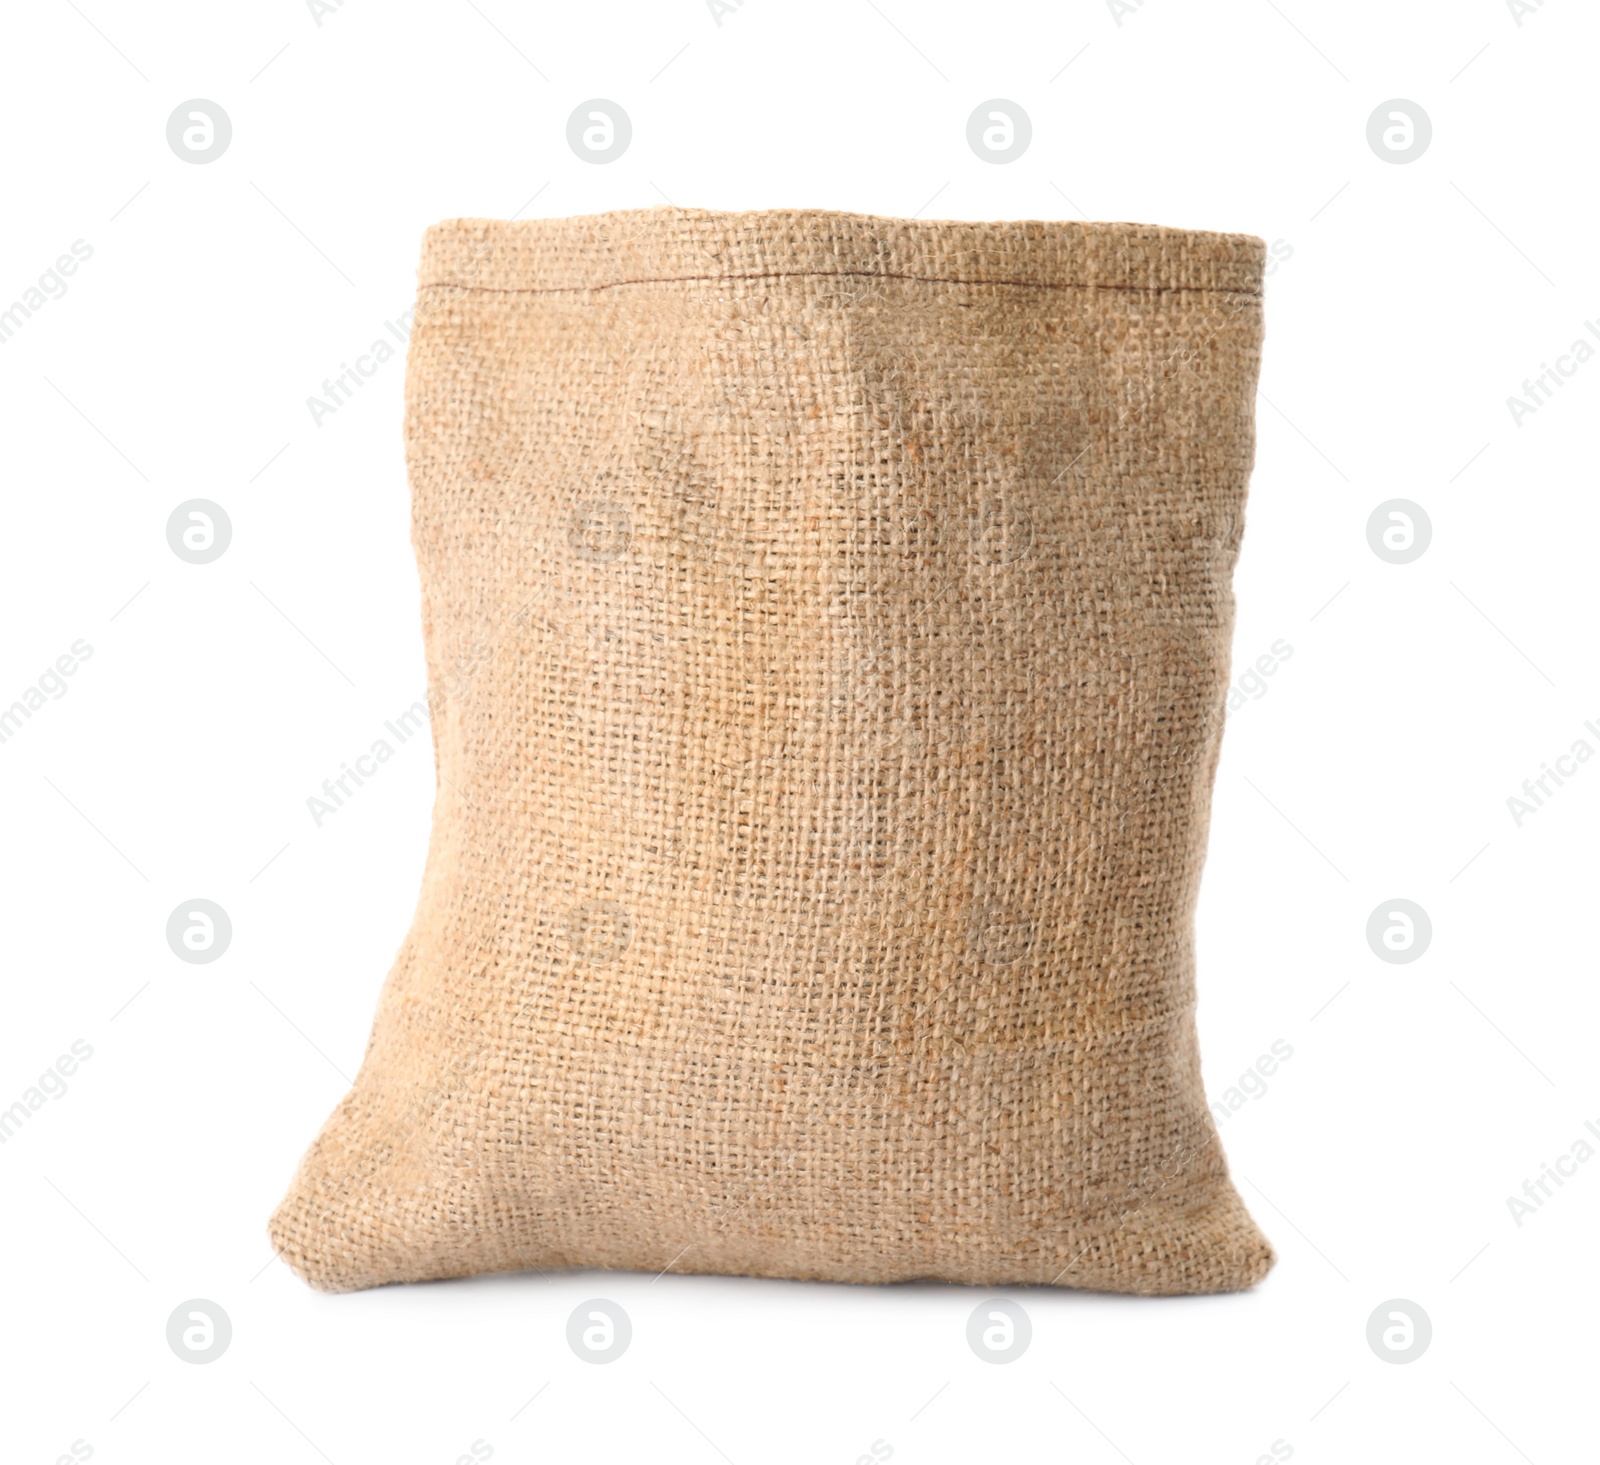 Photo of Small hemp bag on white background. Organic material